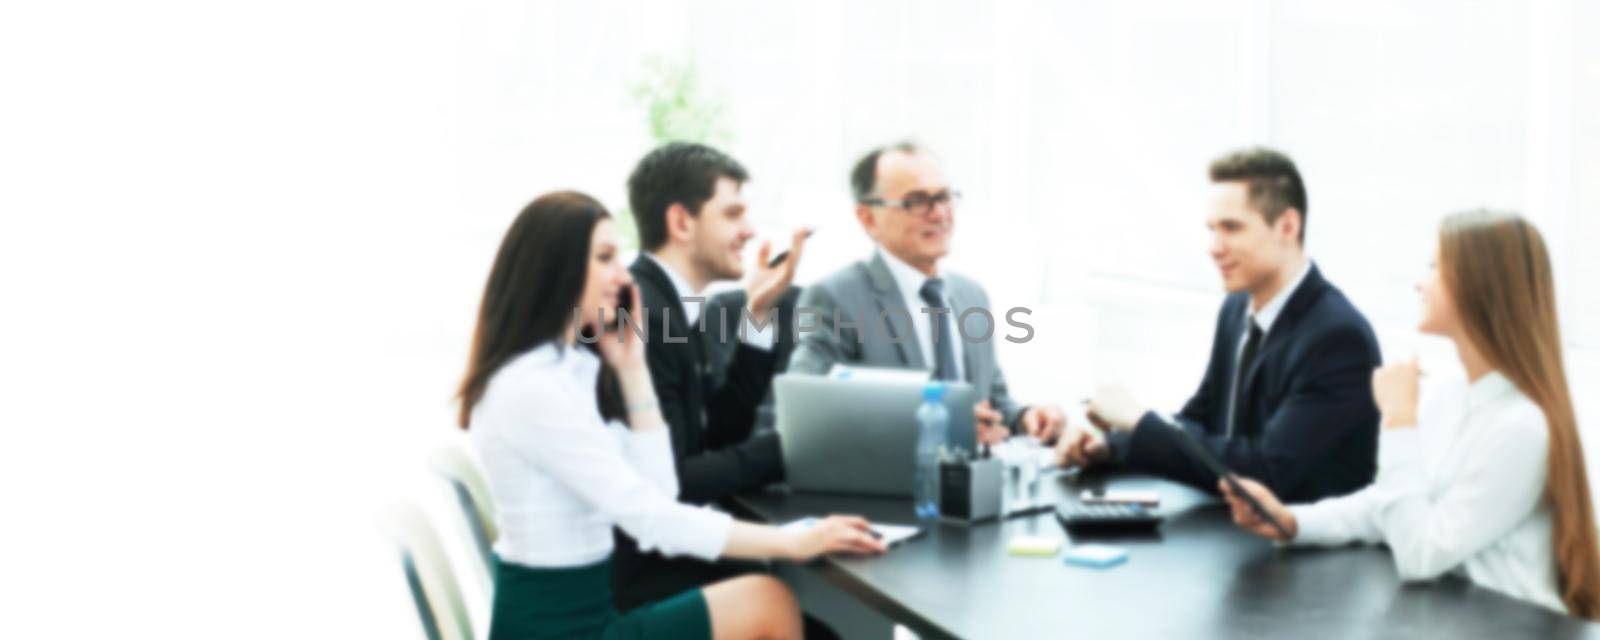 Manager and business group discussing financial documents.office weekdays. blurred image for the advertising text.